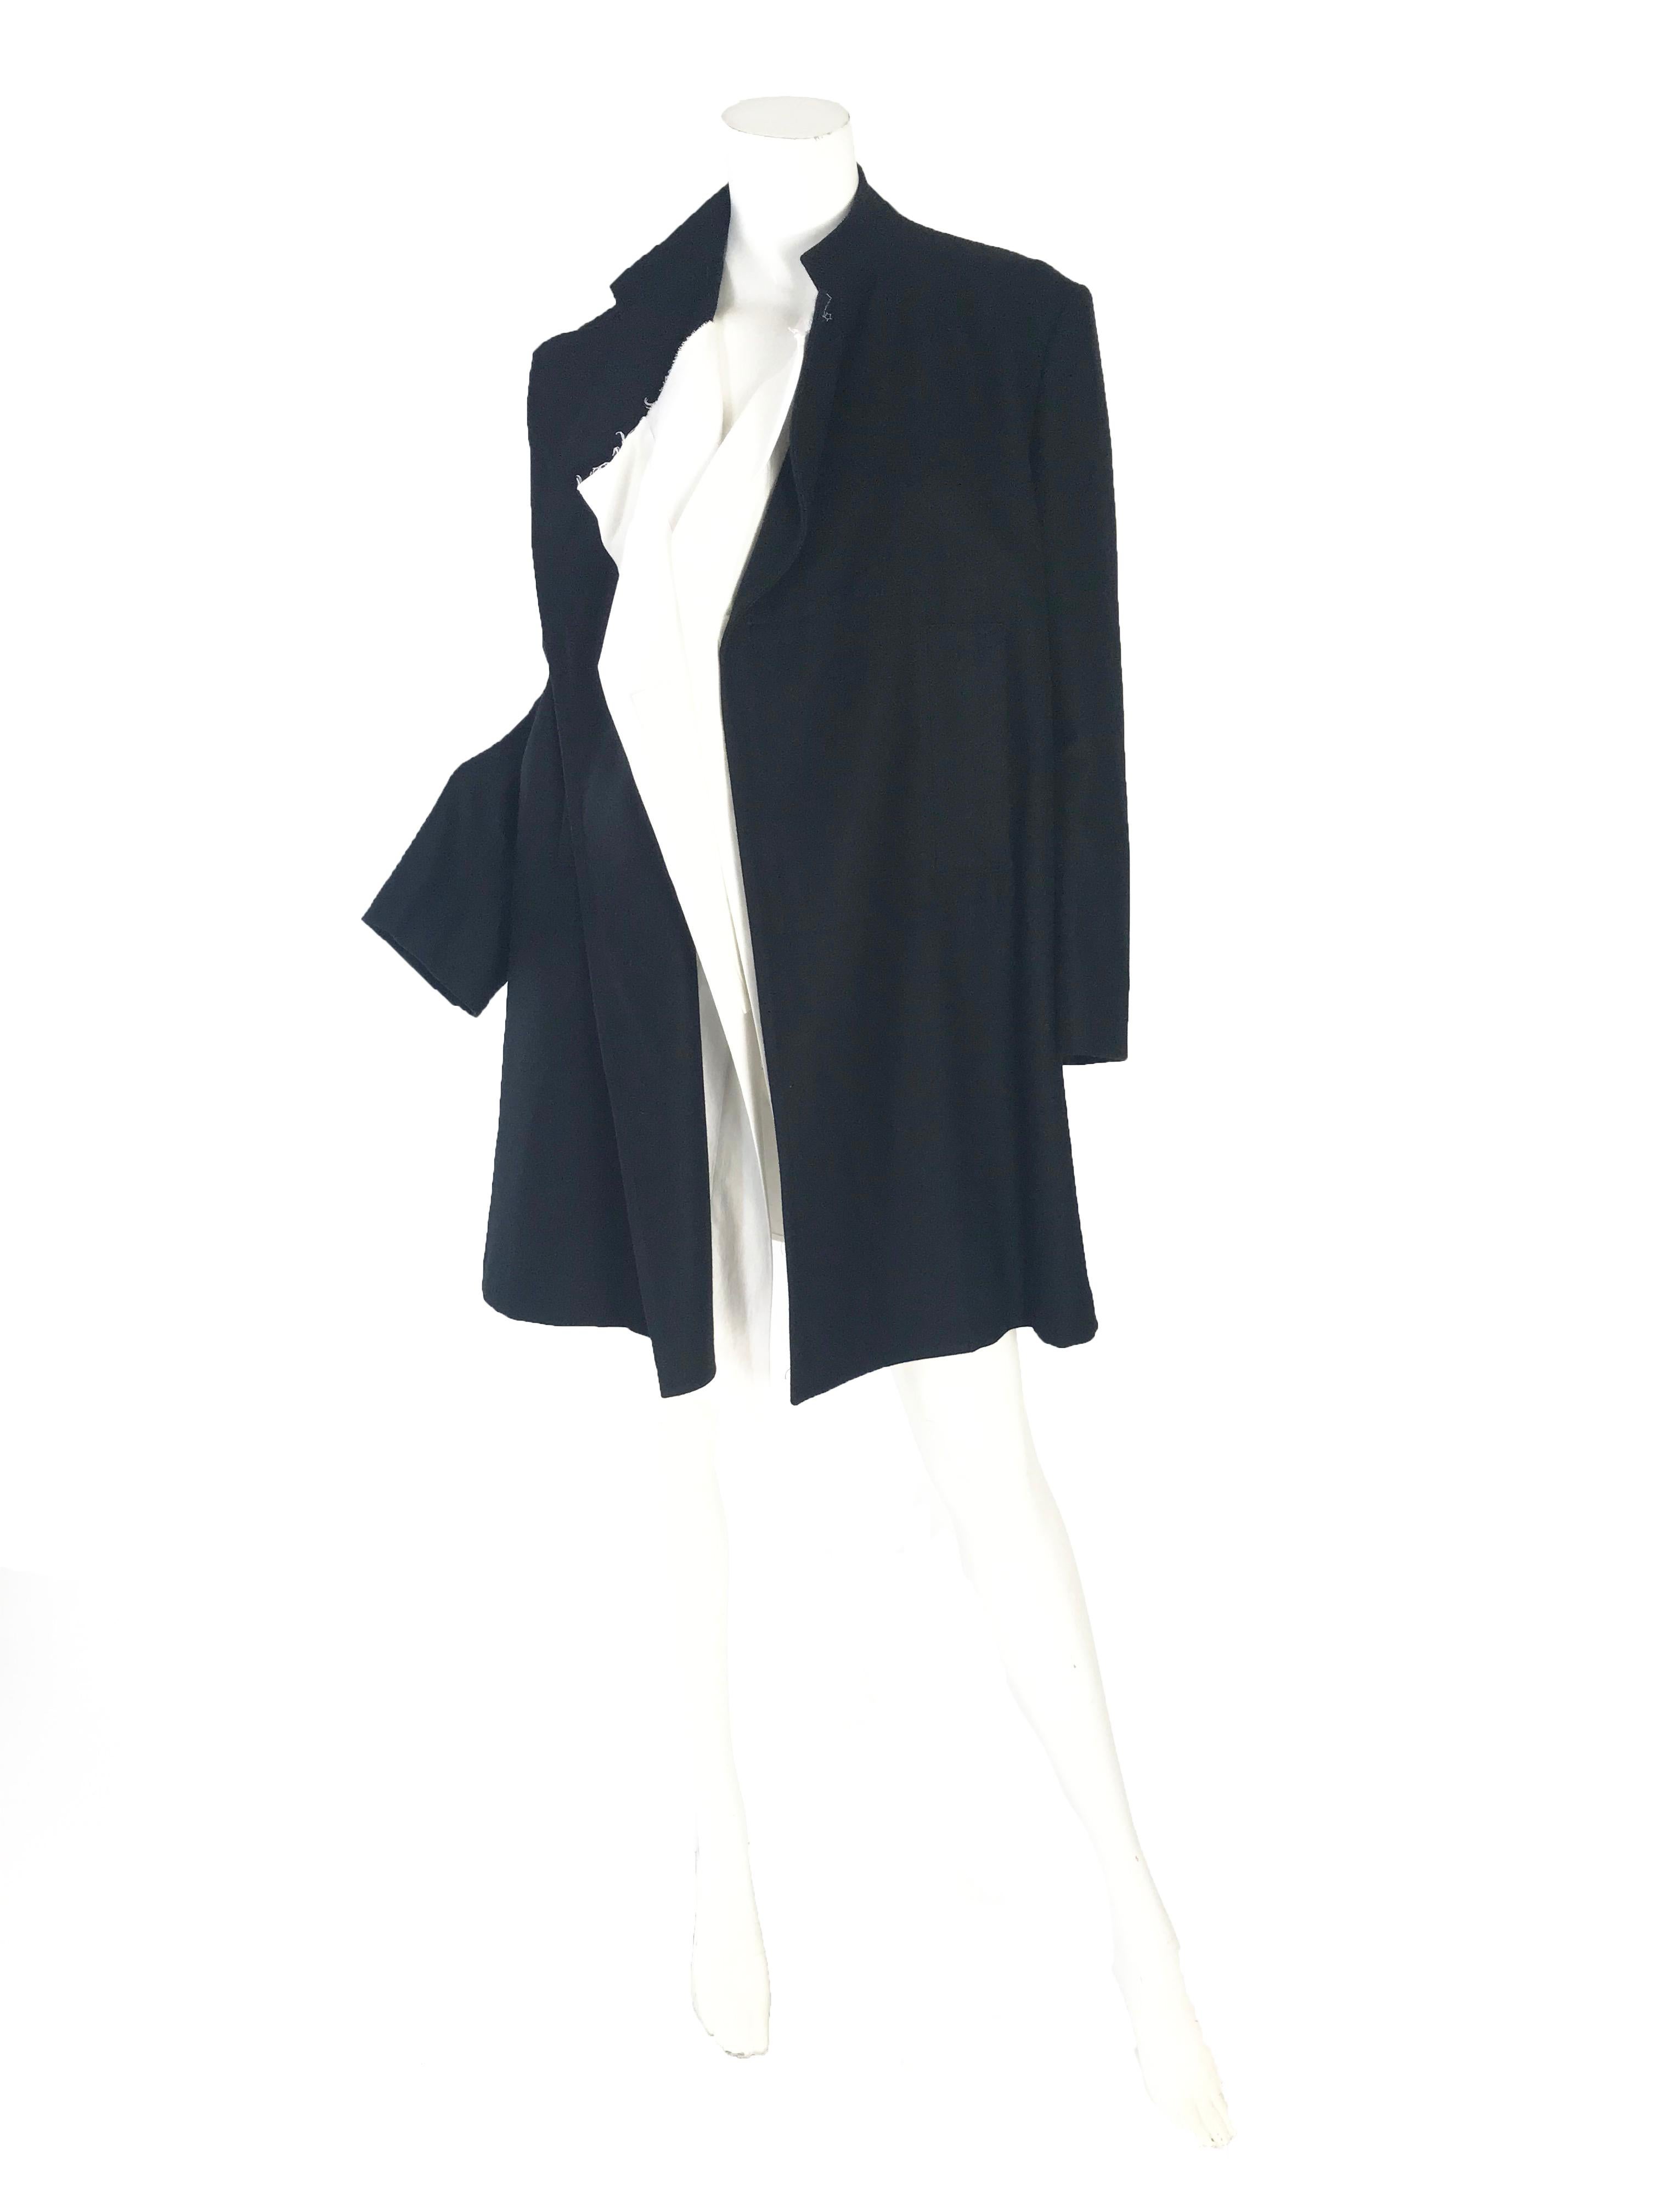 1990s Y's Yohji Yamamoto blk wool coat with white cotton interior. 

Made in Japan
Size 3 / L